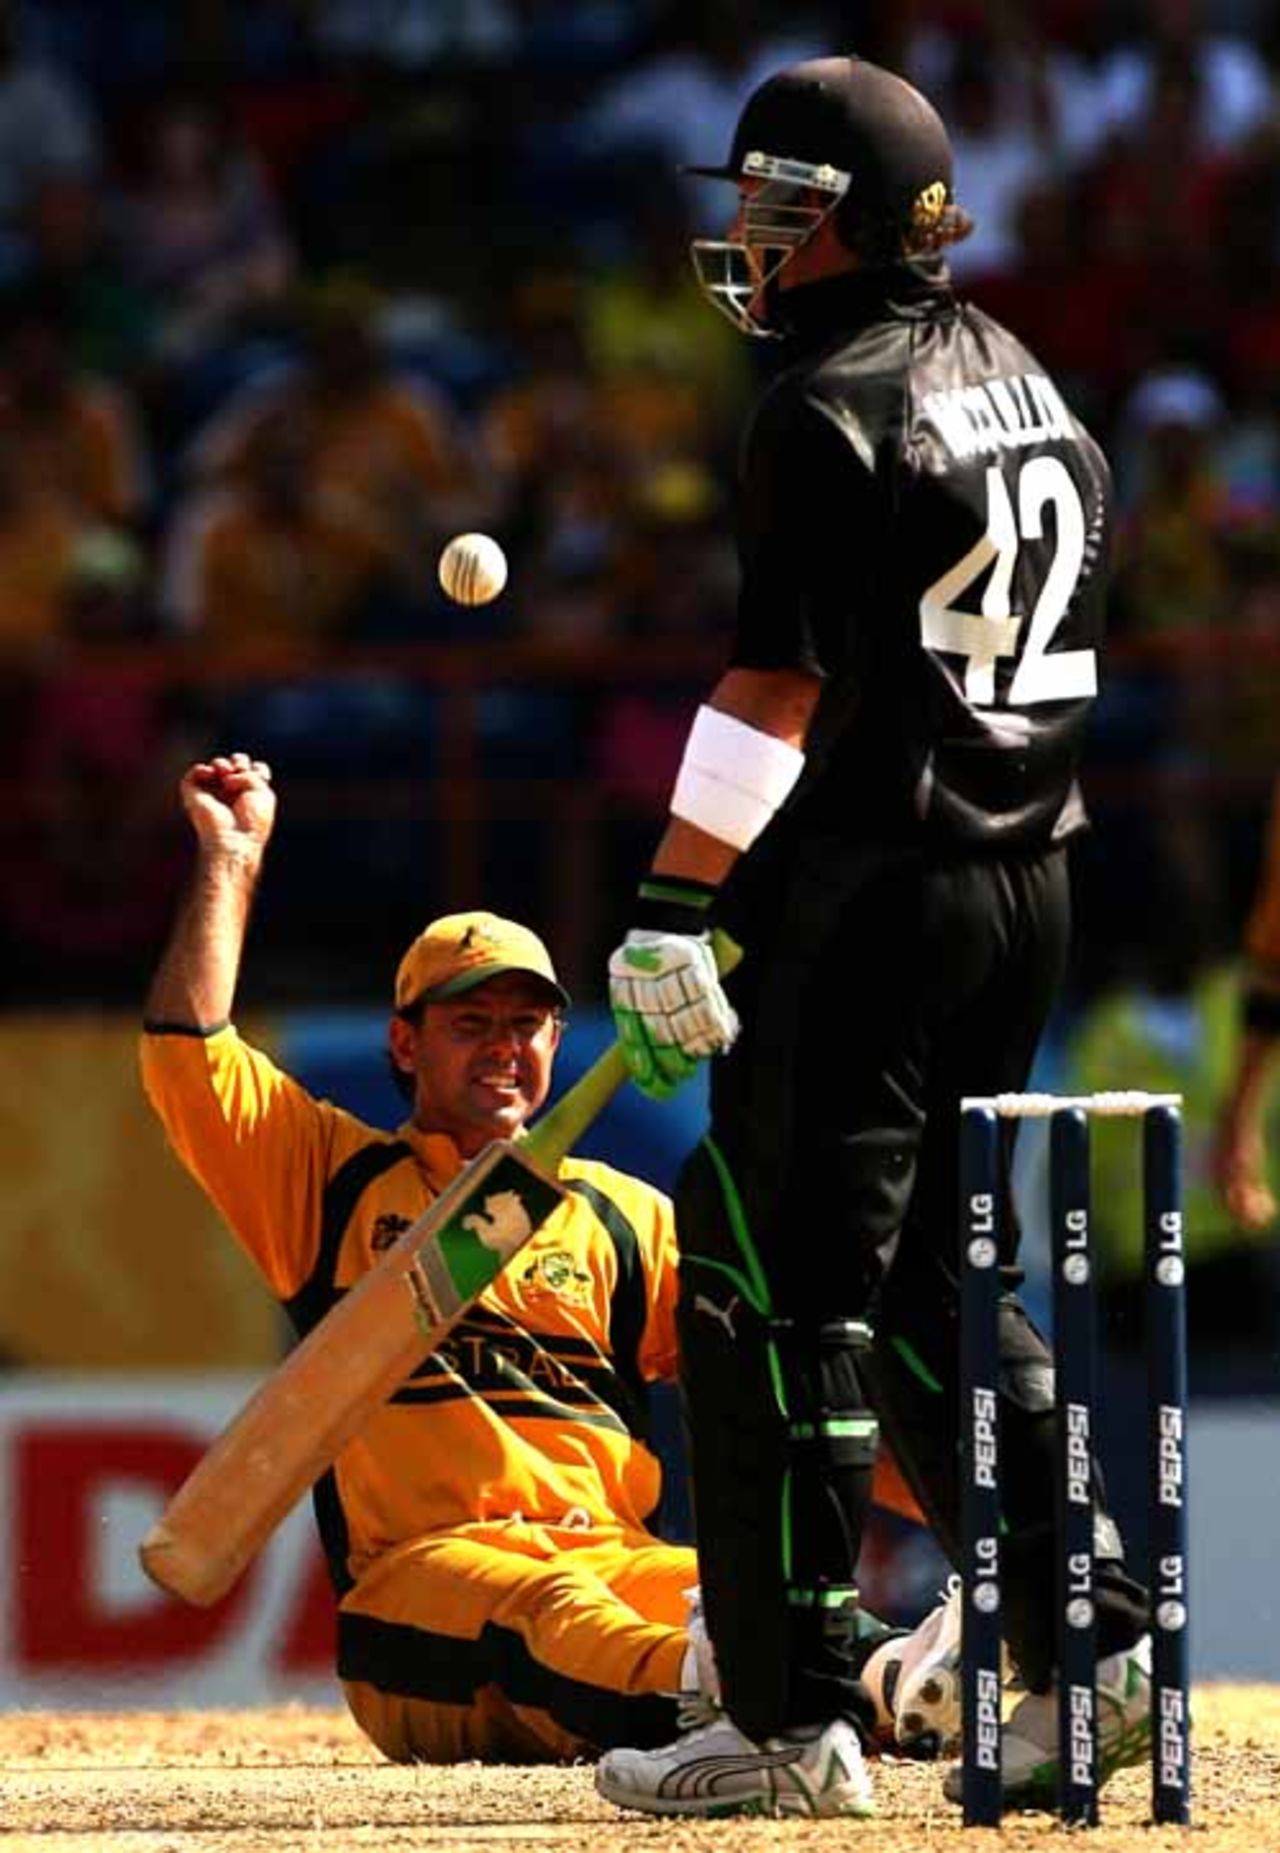 Ricky Ponting prematurely celebrates what he believed was a catch to dismiss Brendon McCullum, Australia v New Zealand, Super Eights, Grenada, April 20, 2007